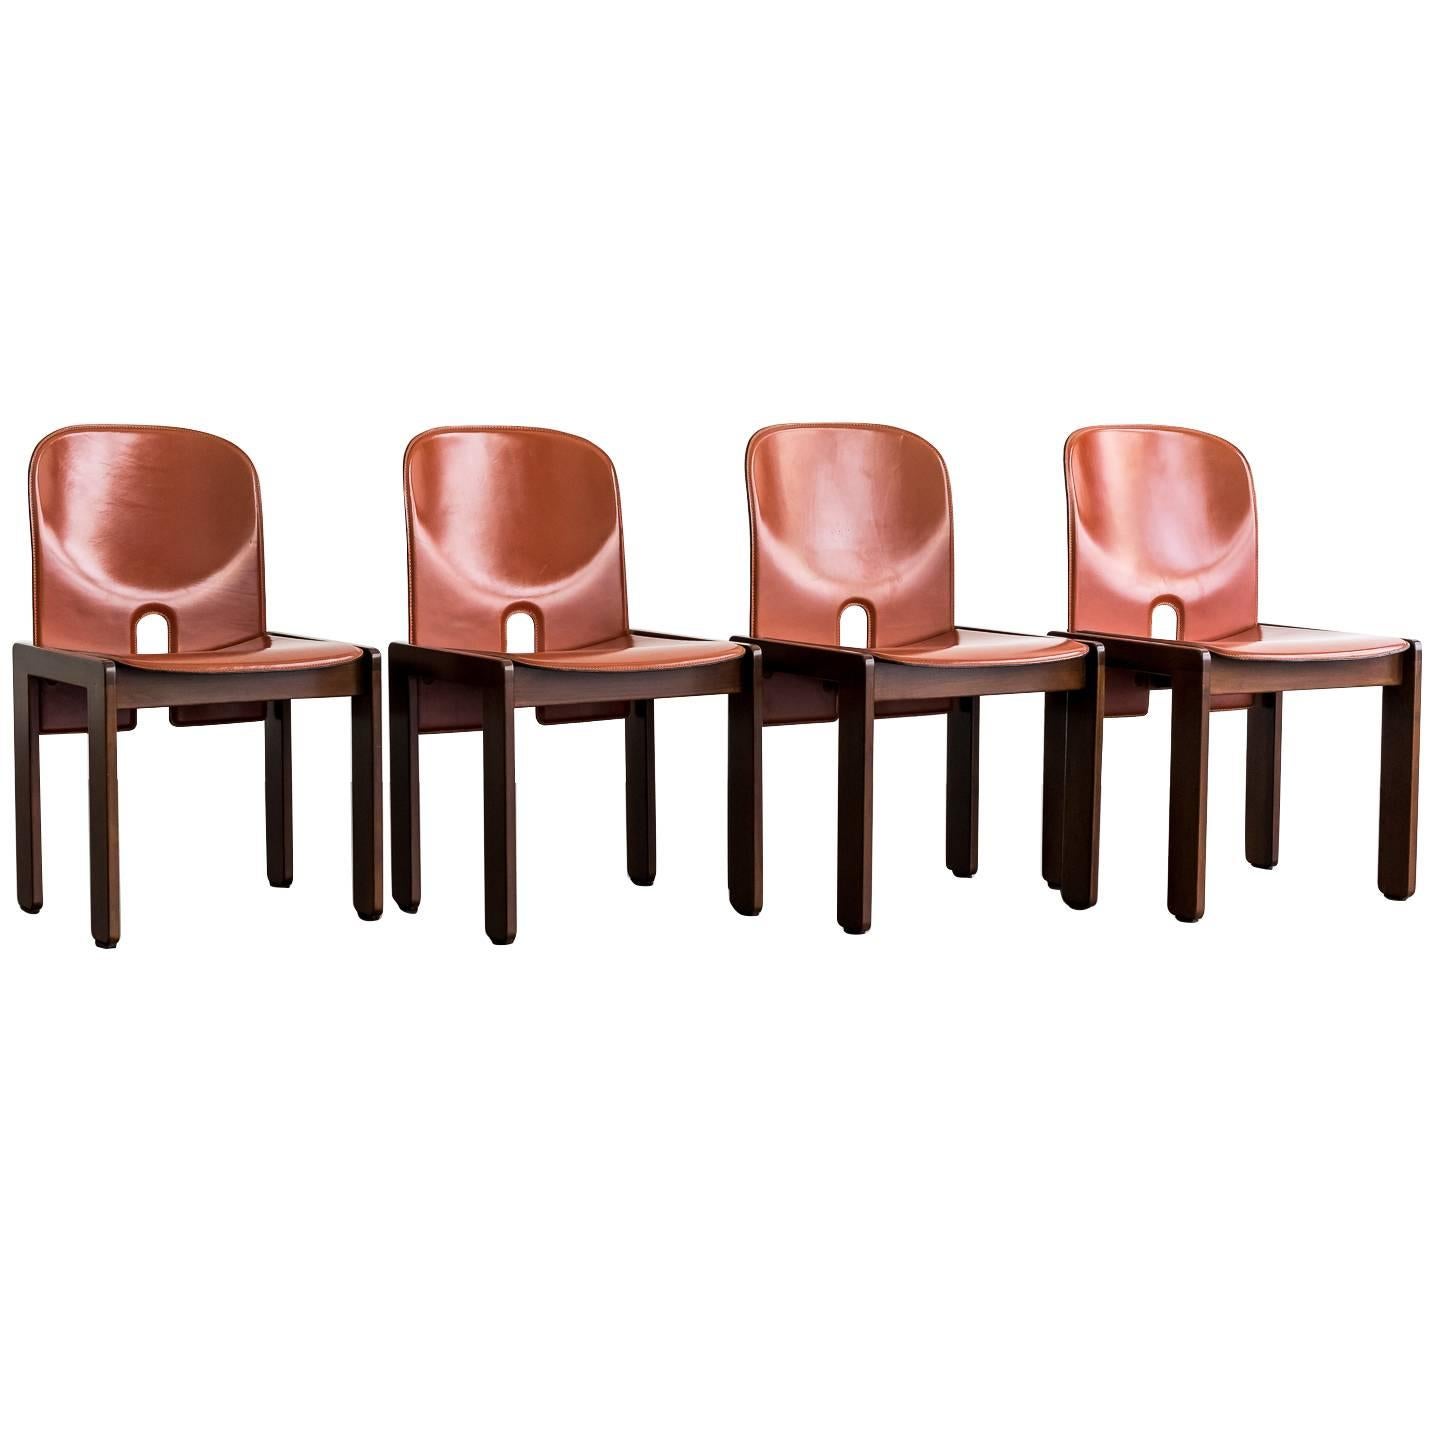 Set of 4 Walnut & Leather "121" Chairs by Afra & Tobia Scarpa for Cassina, 1965